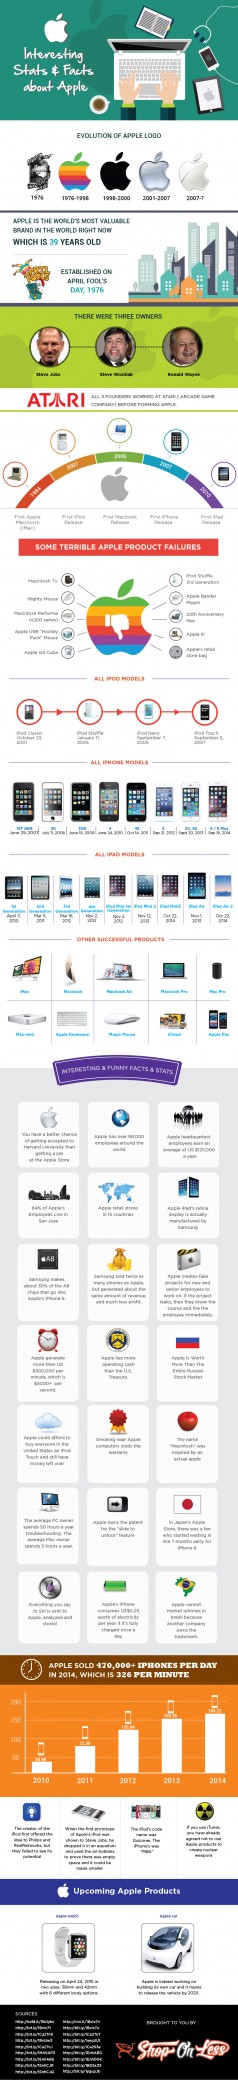 37 Crazy Apple Facts & Stats (Infographic)